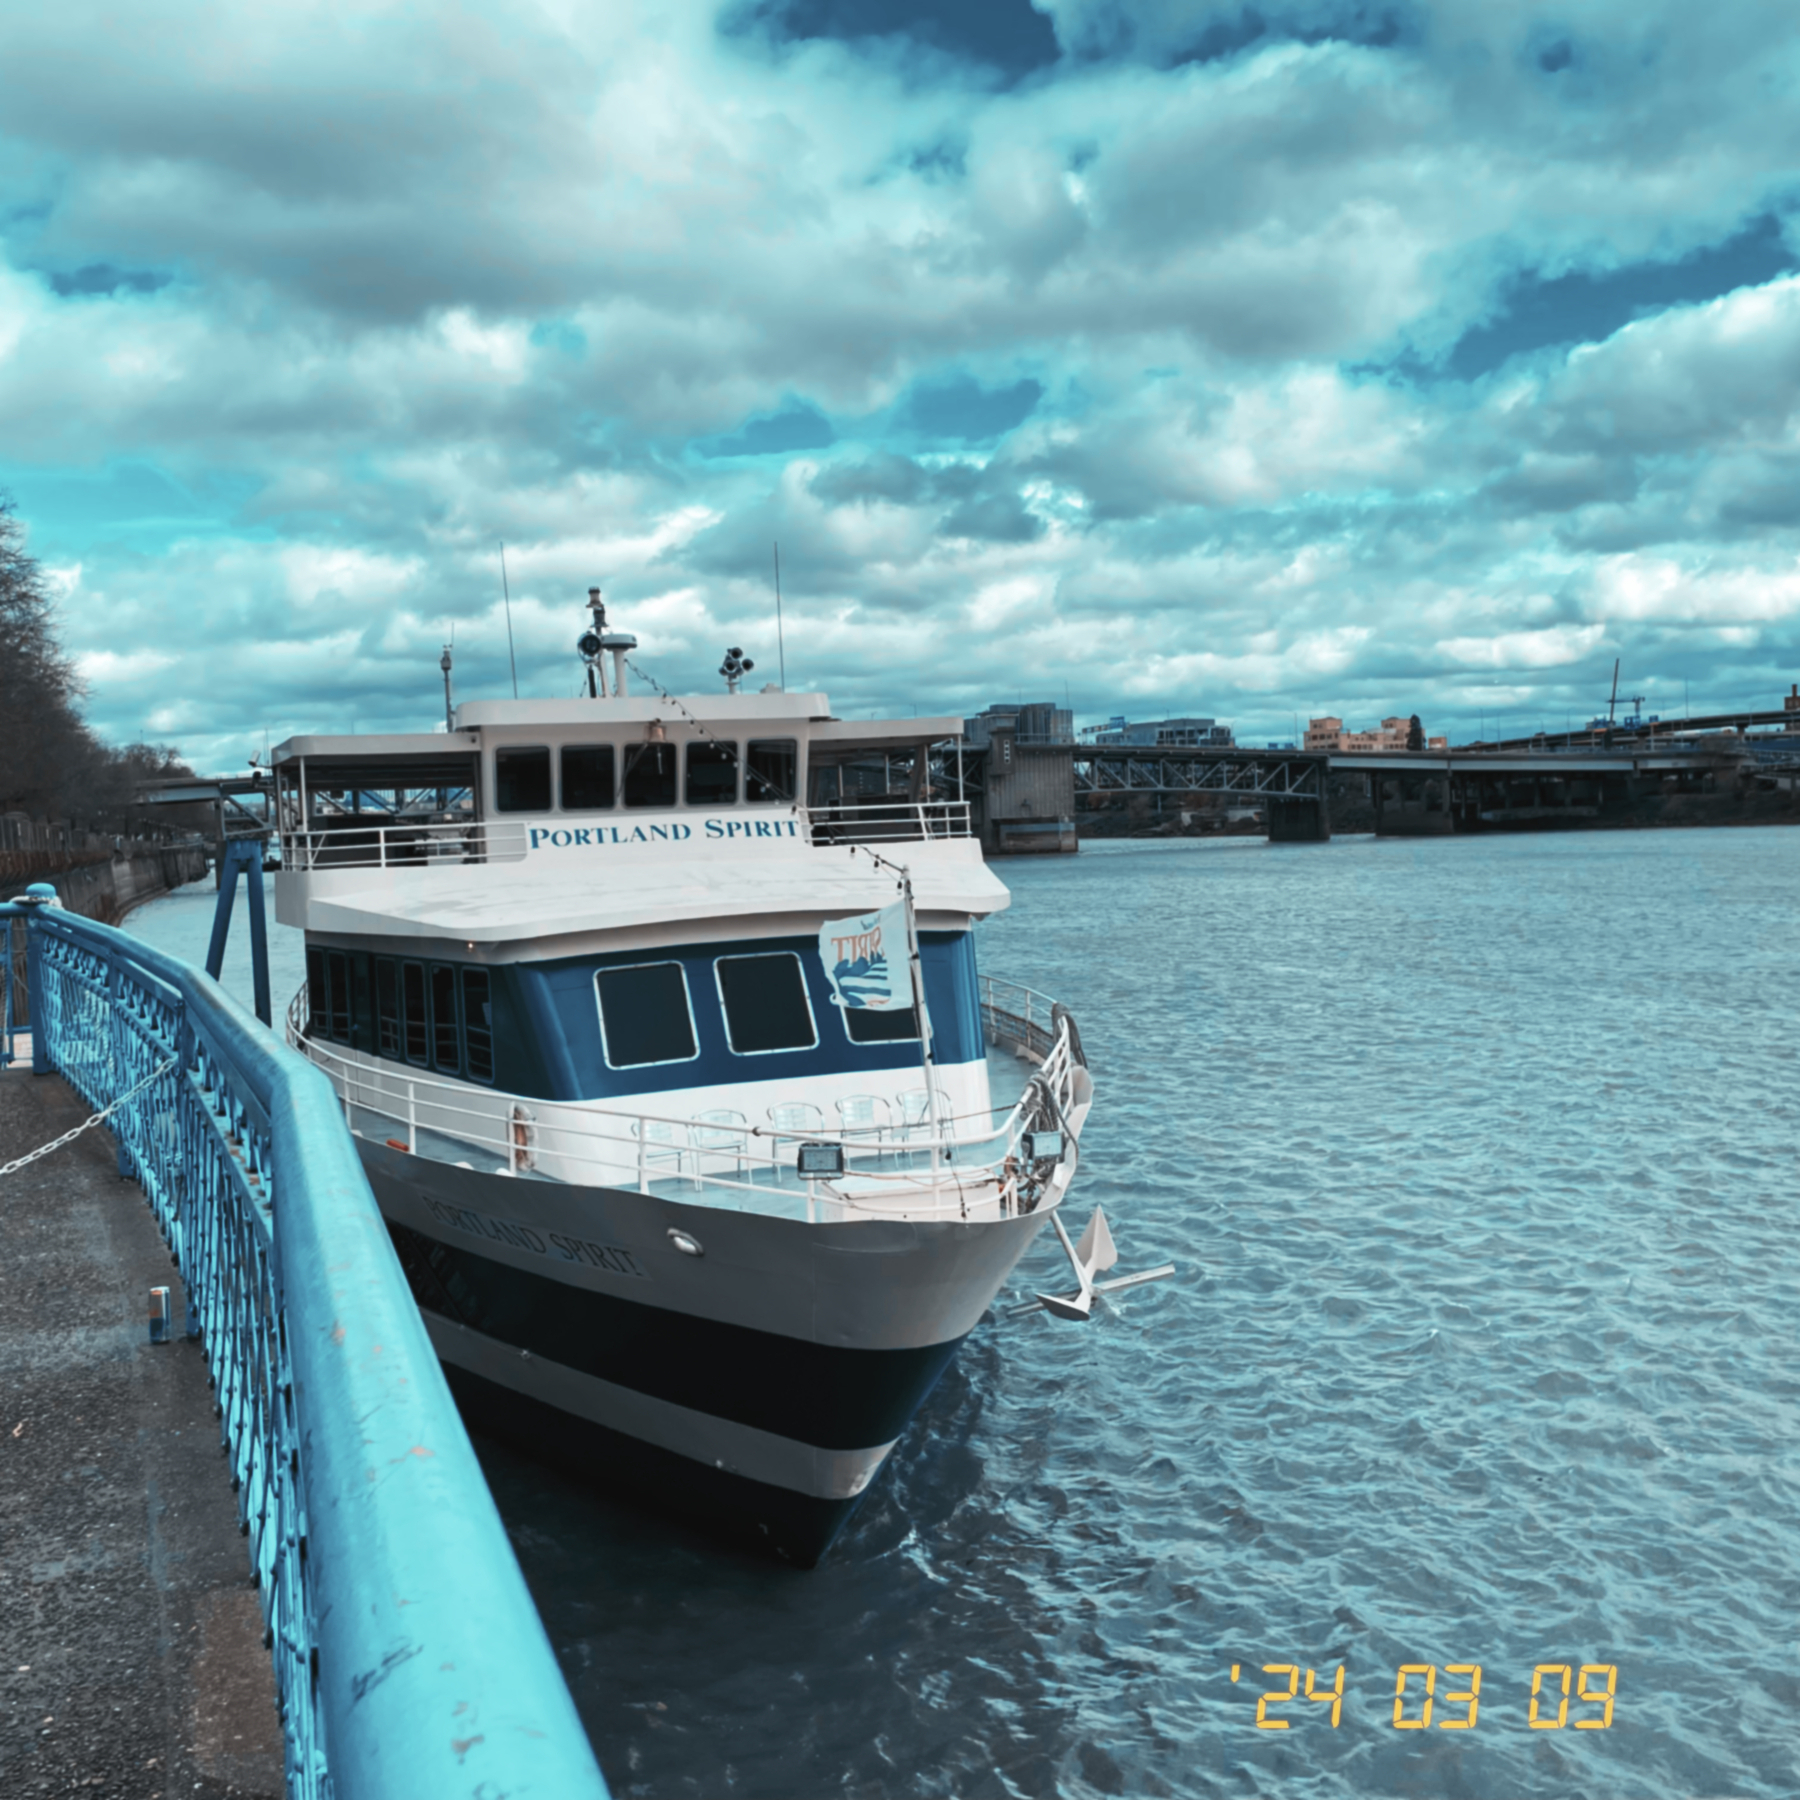 view of the Portland Spirit and the Willamette River from the dock